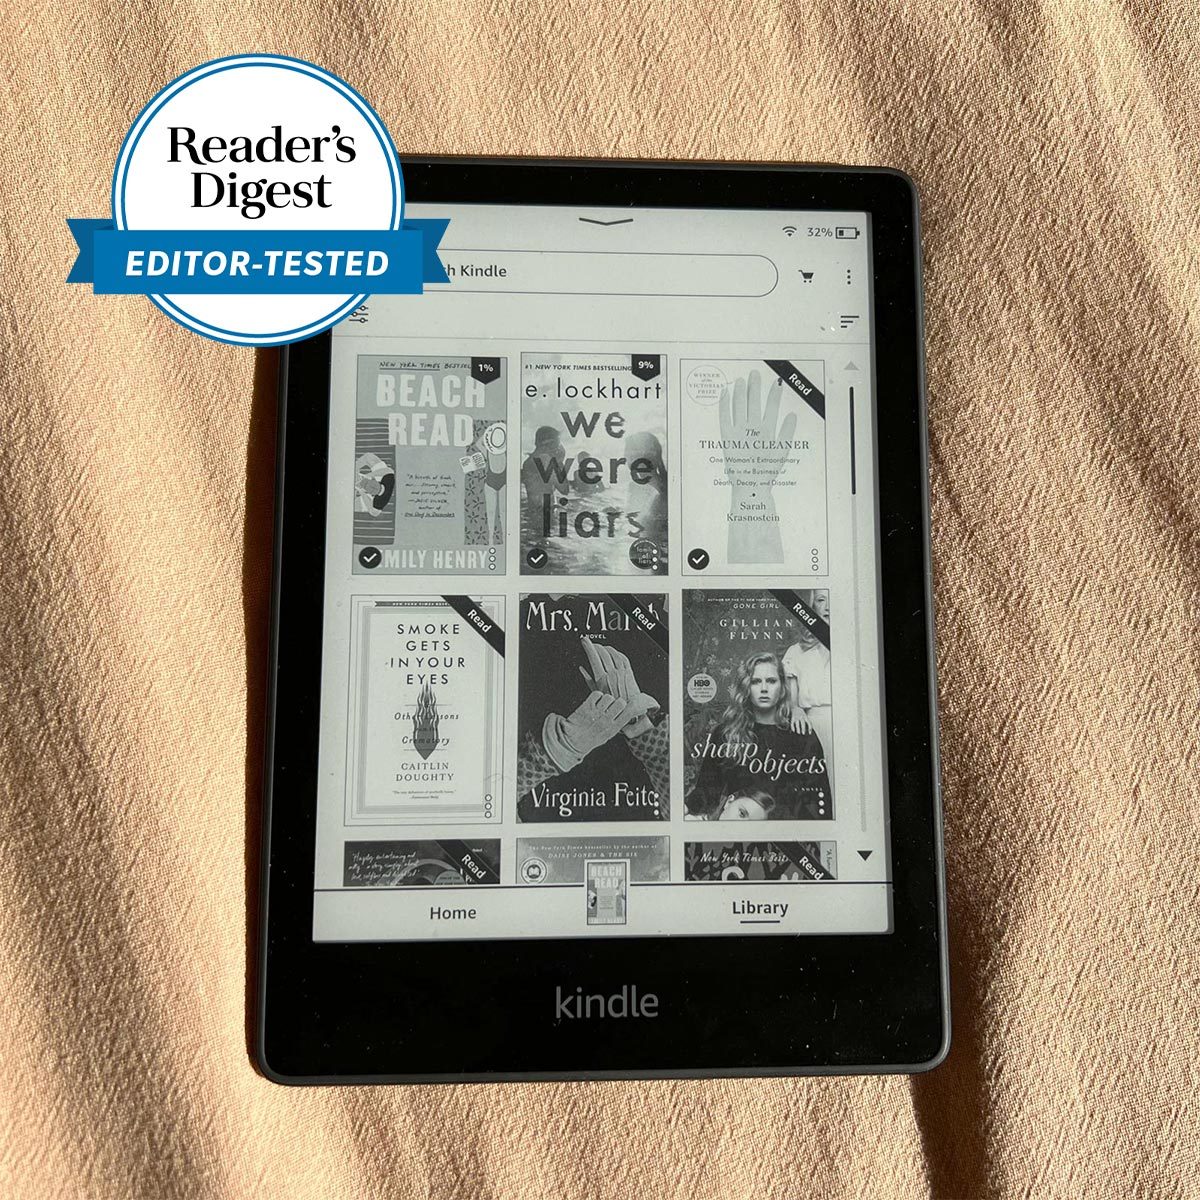 The Kindle Paperwhite gets a new look